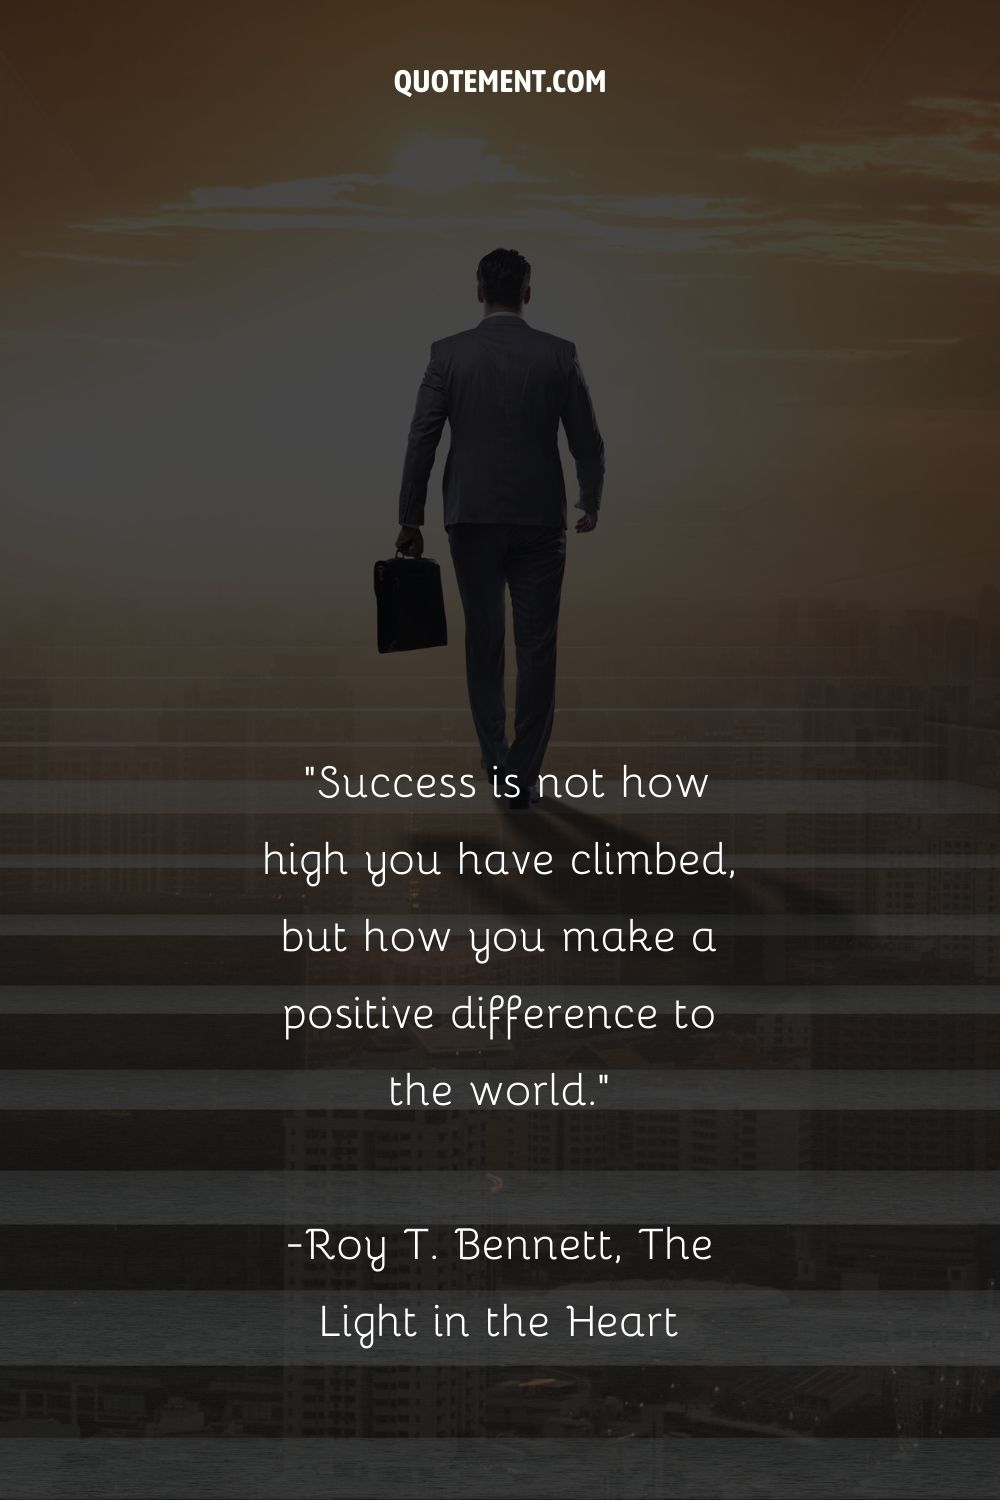 Success is not how high you have climbed, but how you make a positive difference to the world